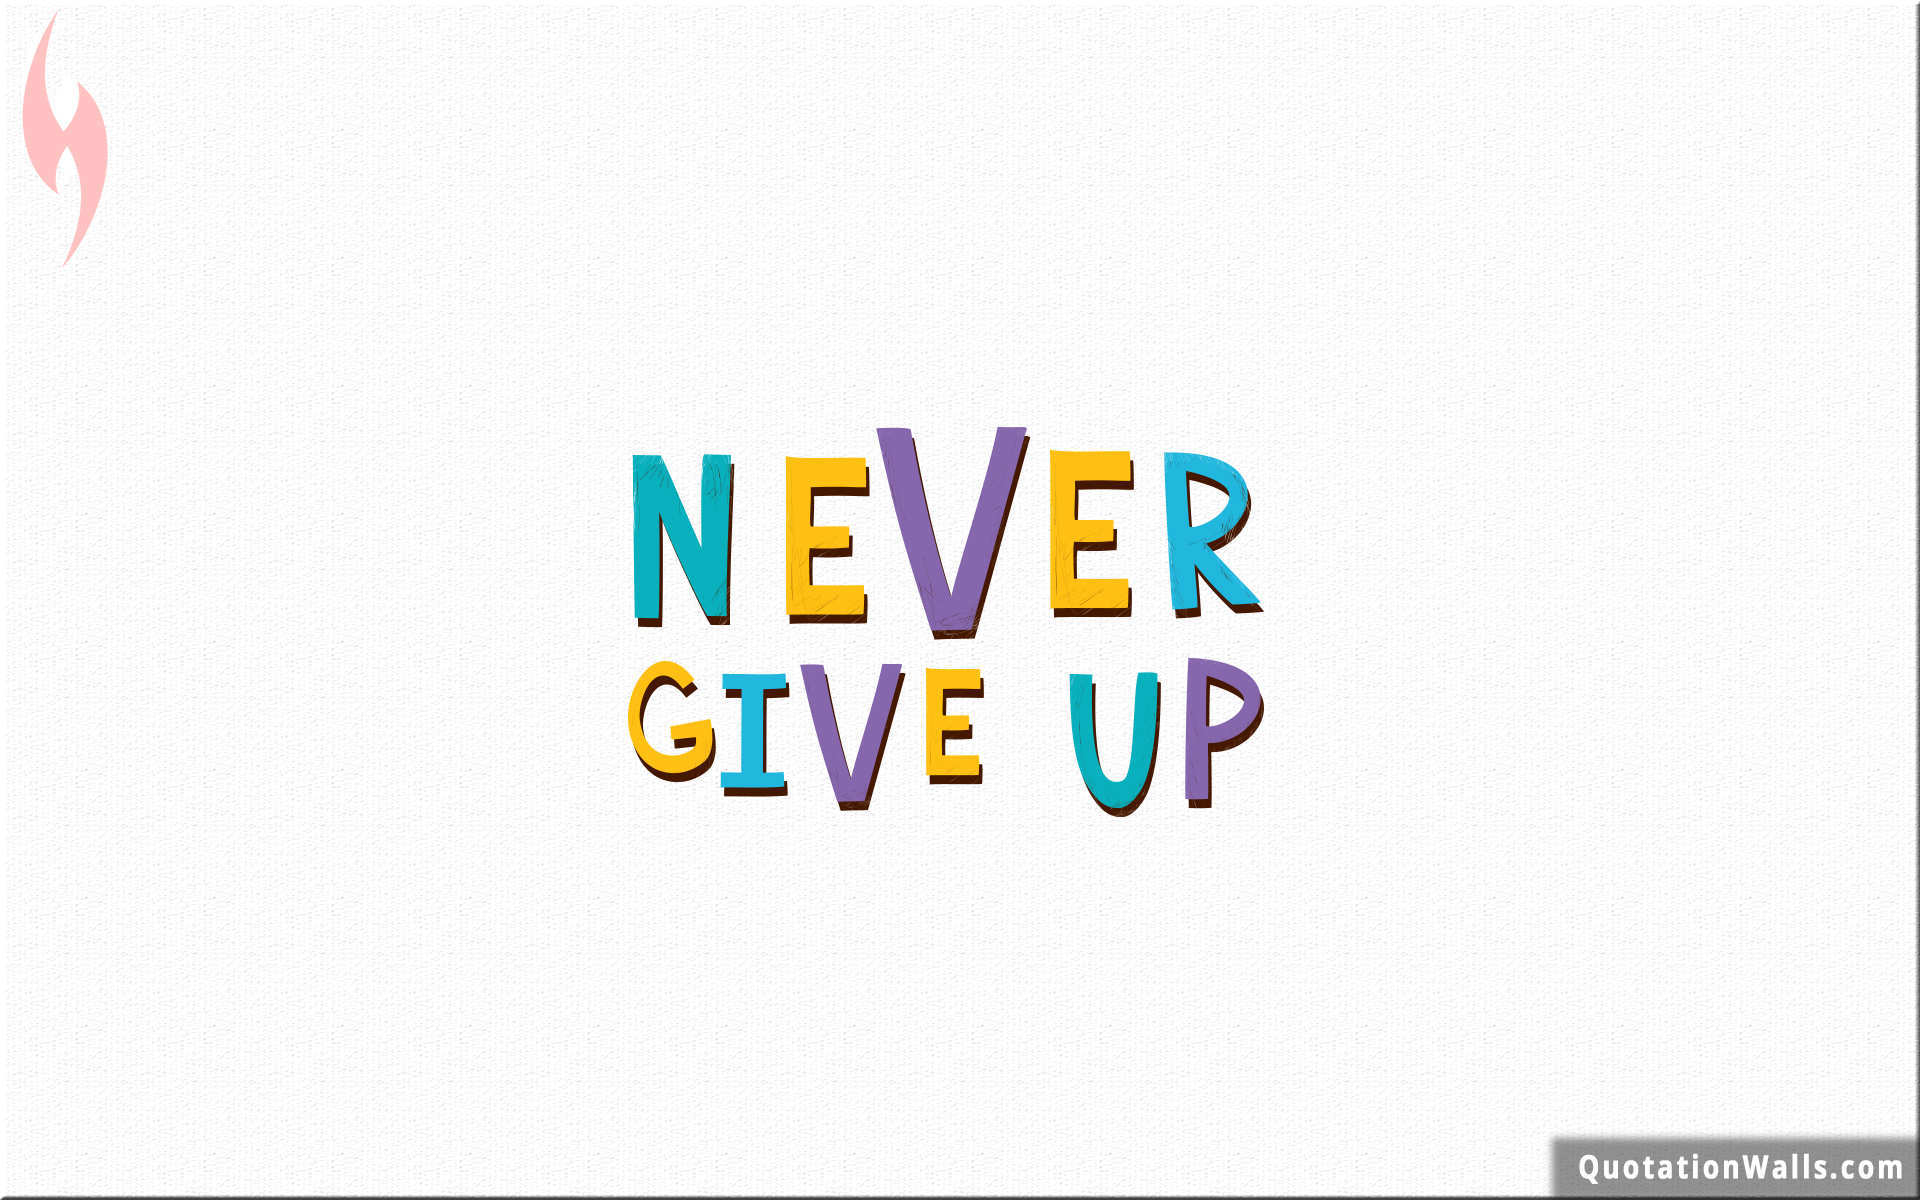 Never Give Up Wallpaper For Mobile